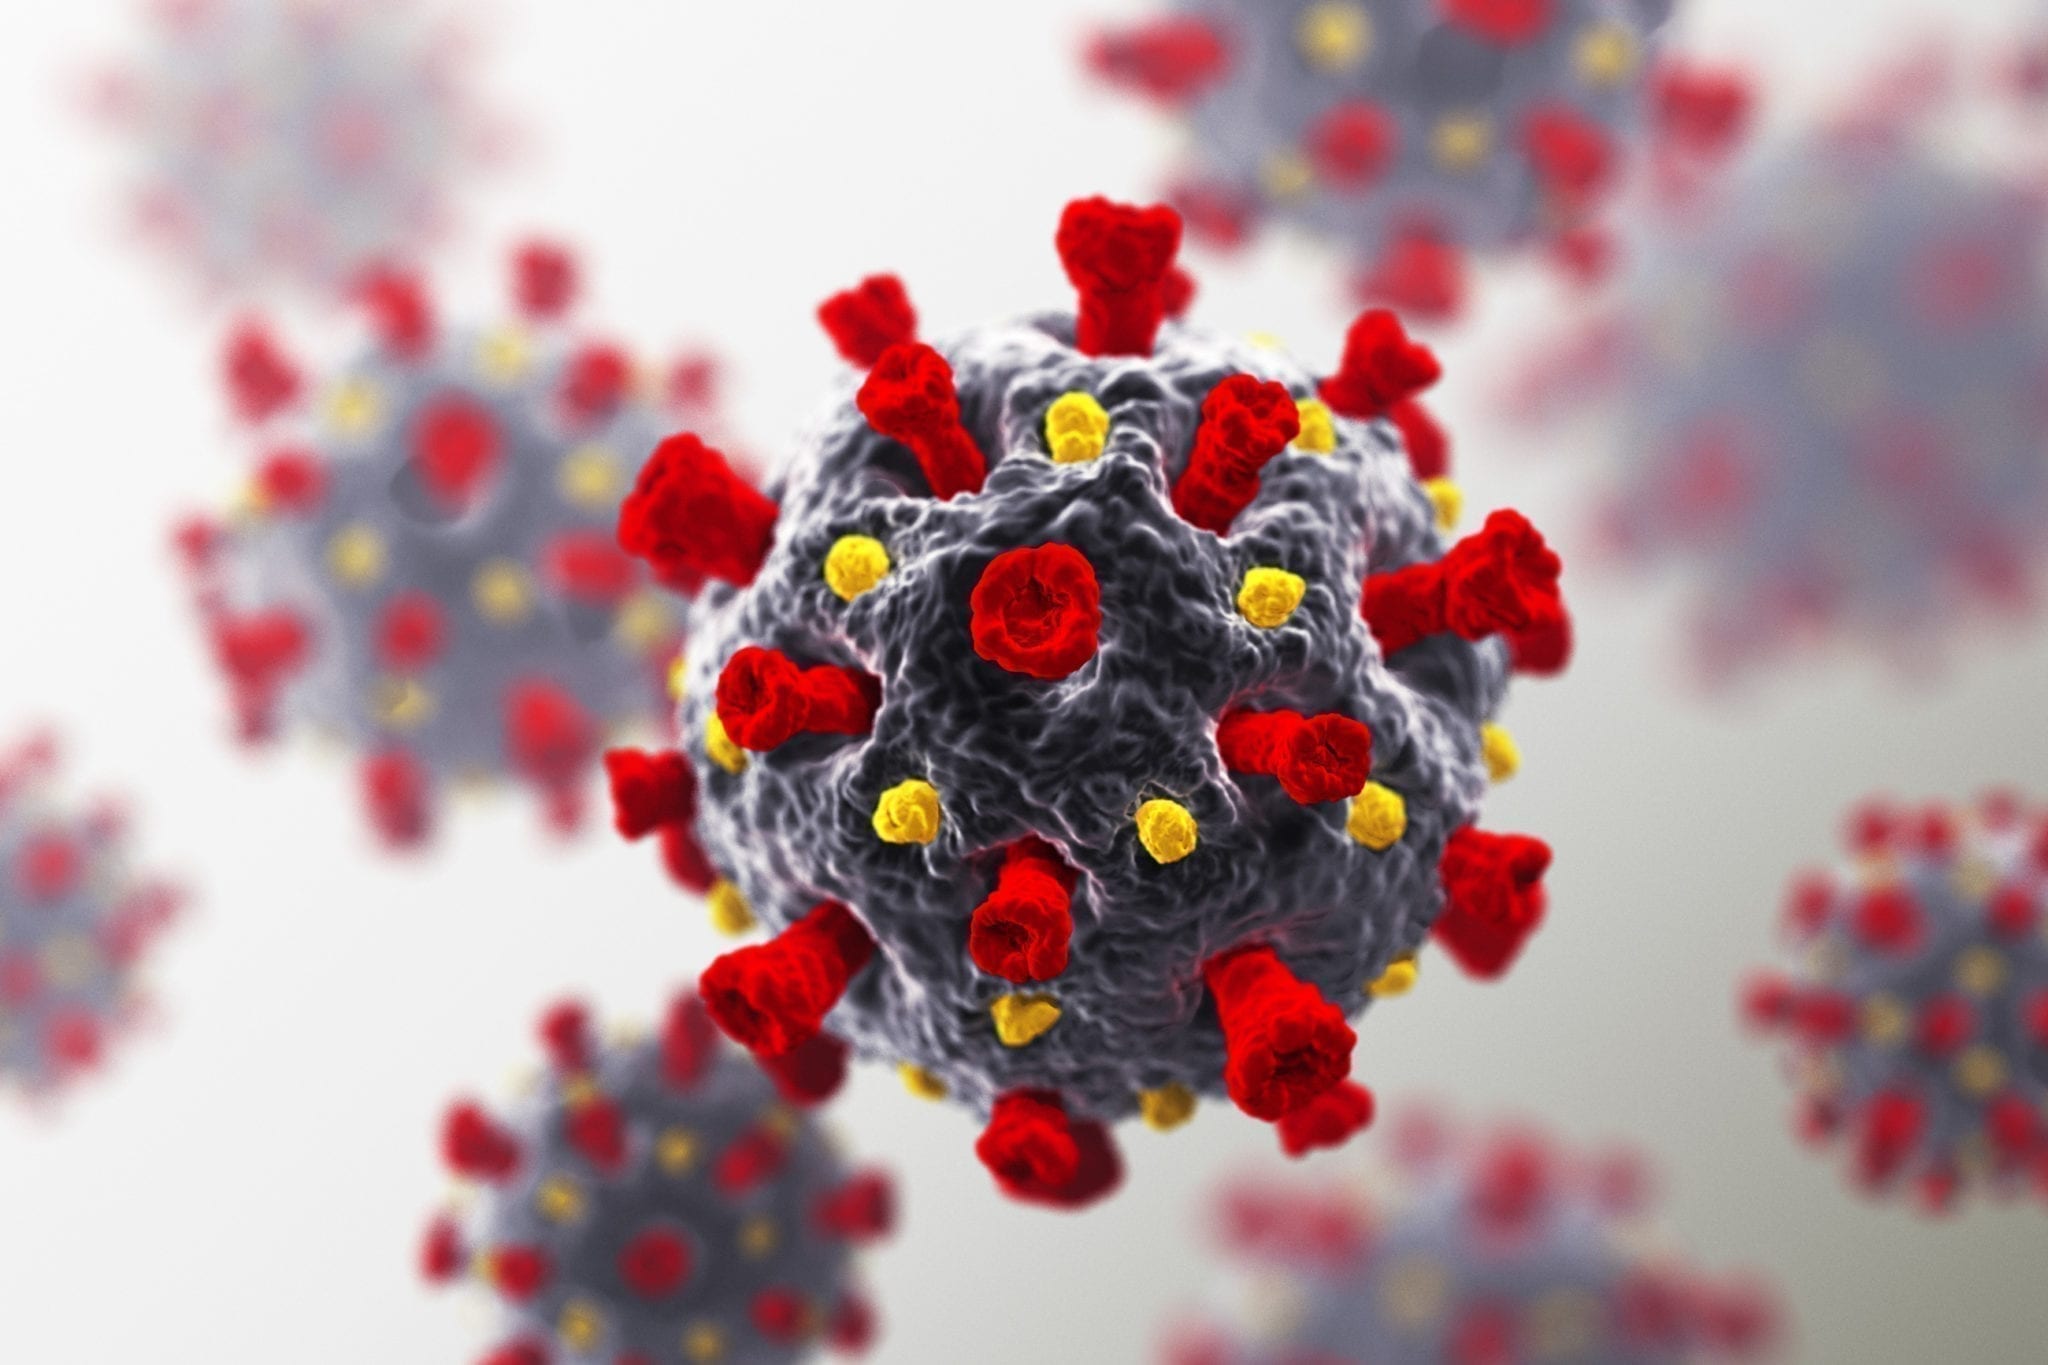 A new antiviral drug completely suppresses SARS-CoV-2 virus transmission within 24 hours